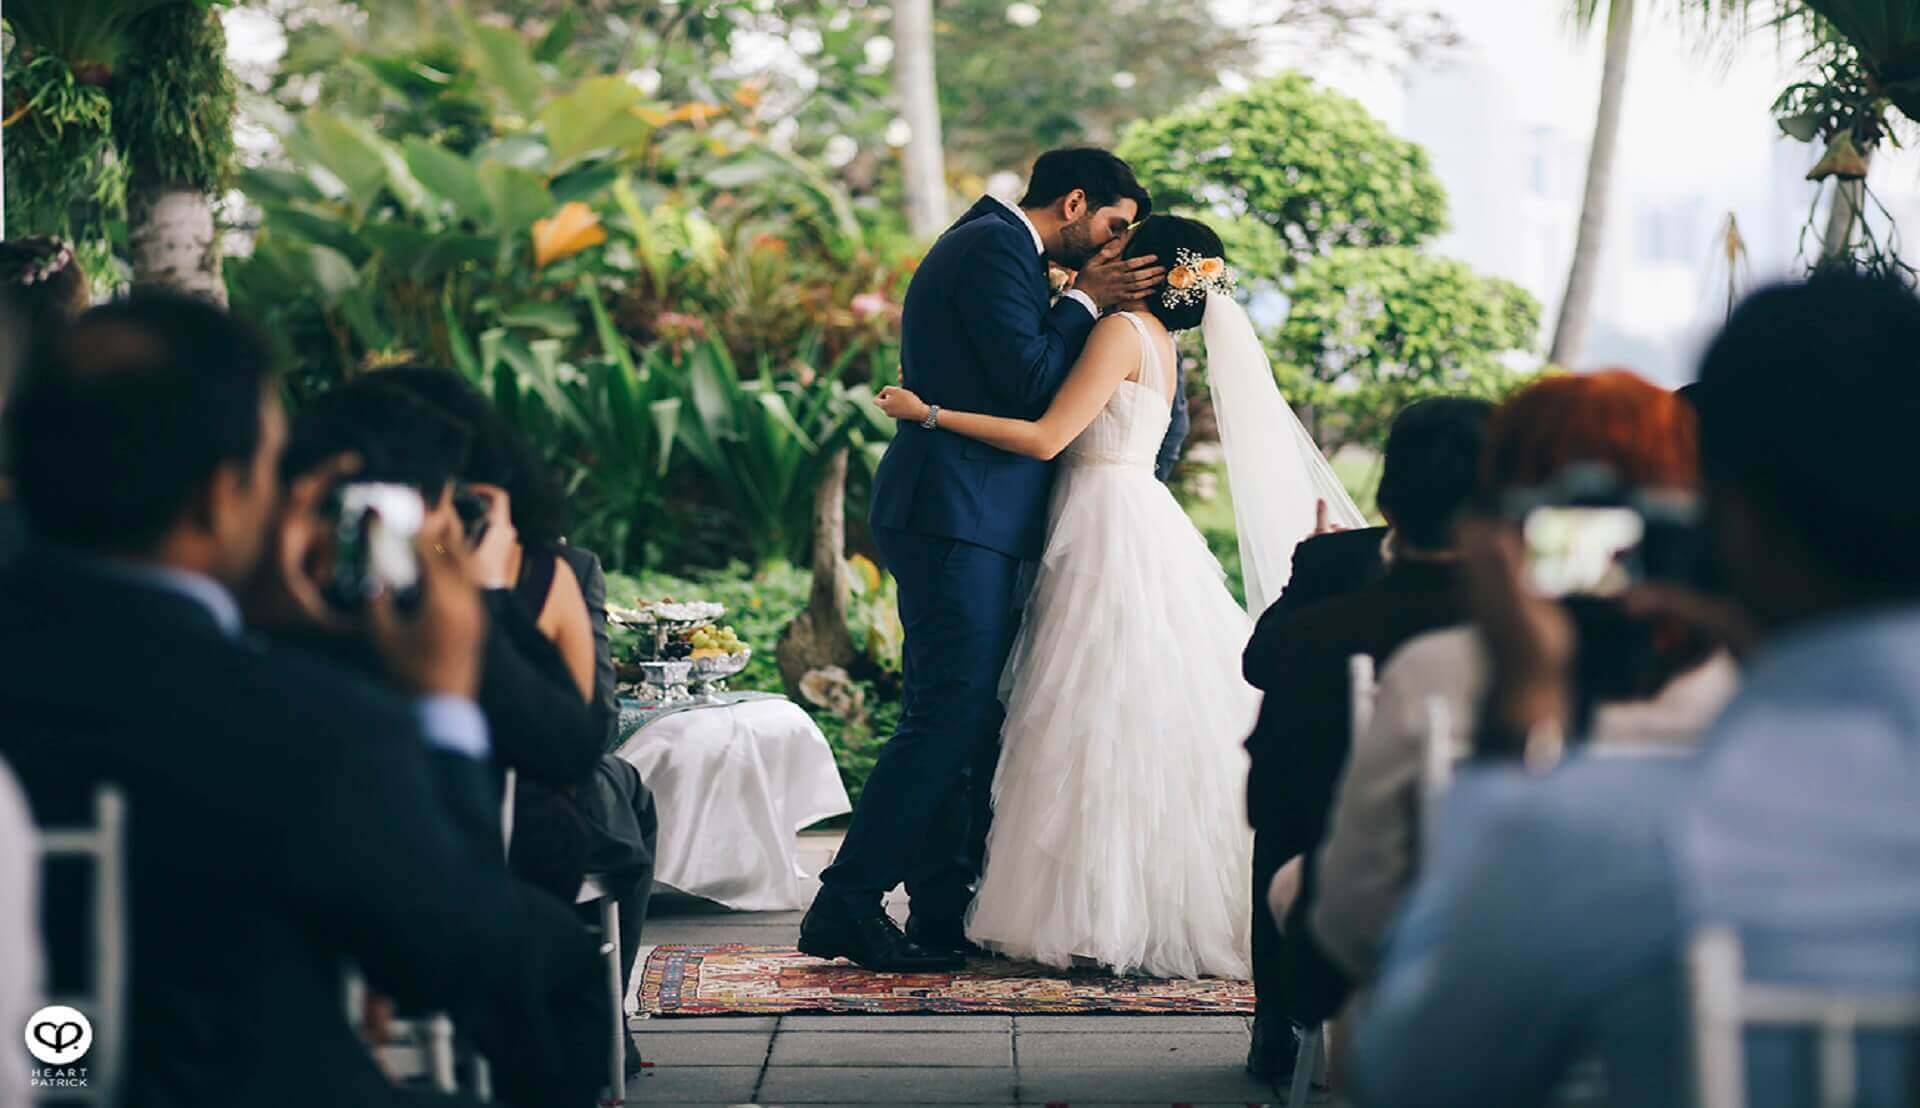 Sugar & Spice Events - Groom kissing the bride after vow exchange ceremony